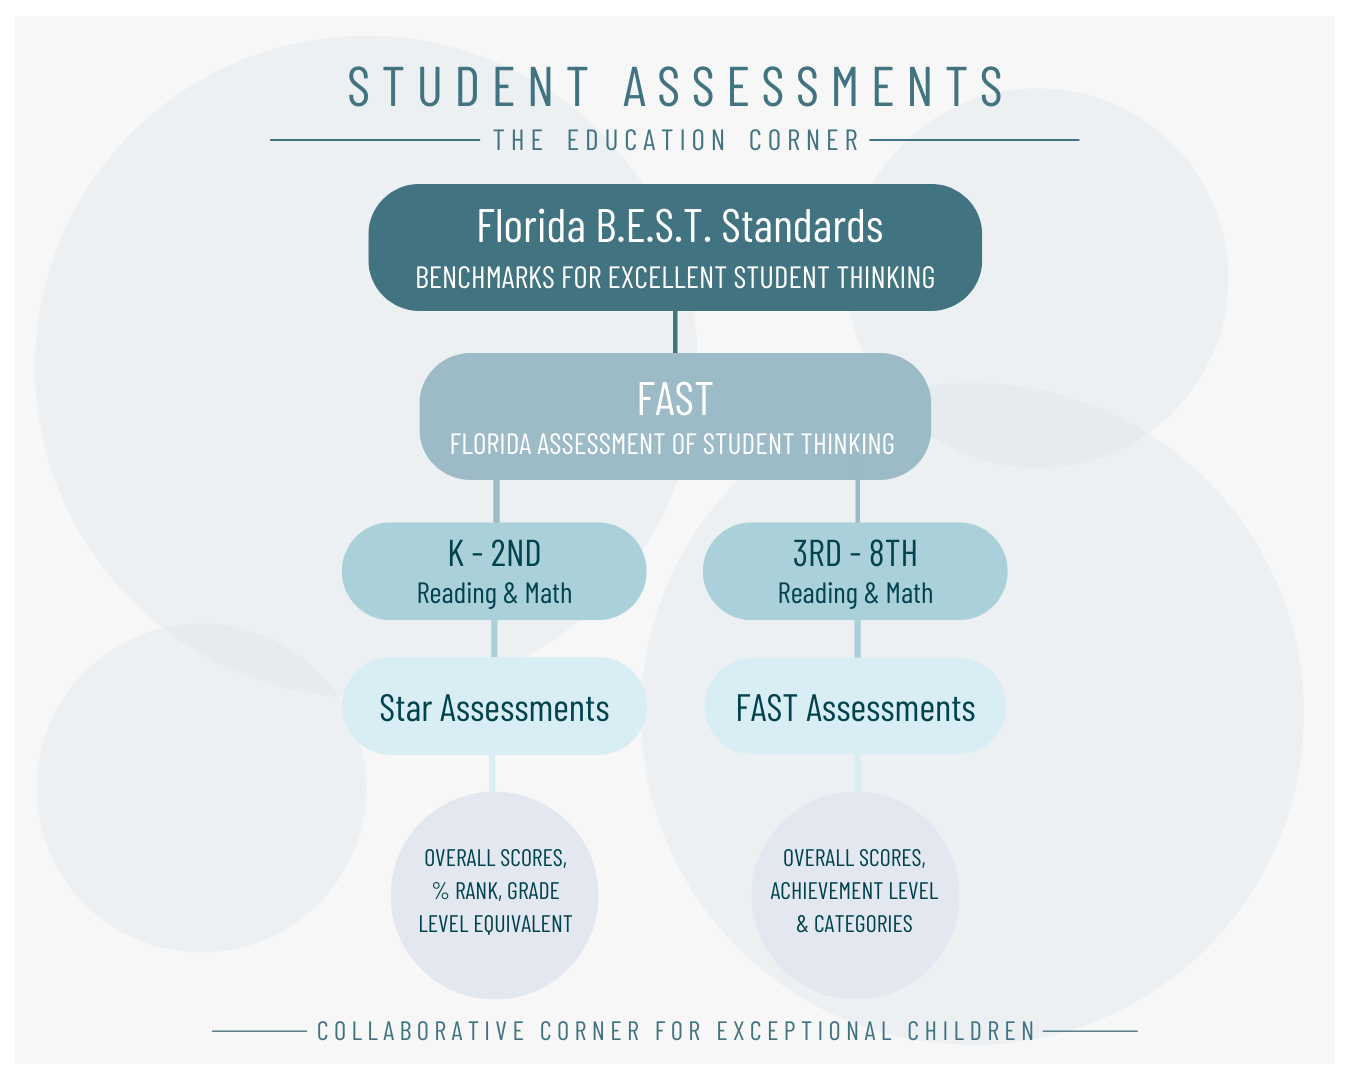 Volusia County Schools on X: Did you know the scale scores for the Florida  Assessment of Student Thinking (FAST) and Benchmarks for Excellent Student  Thinking End-of-Course (EOC) tests have been updated by